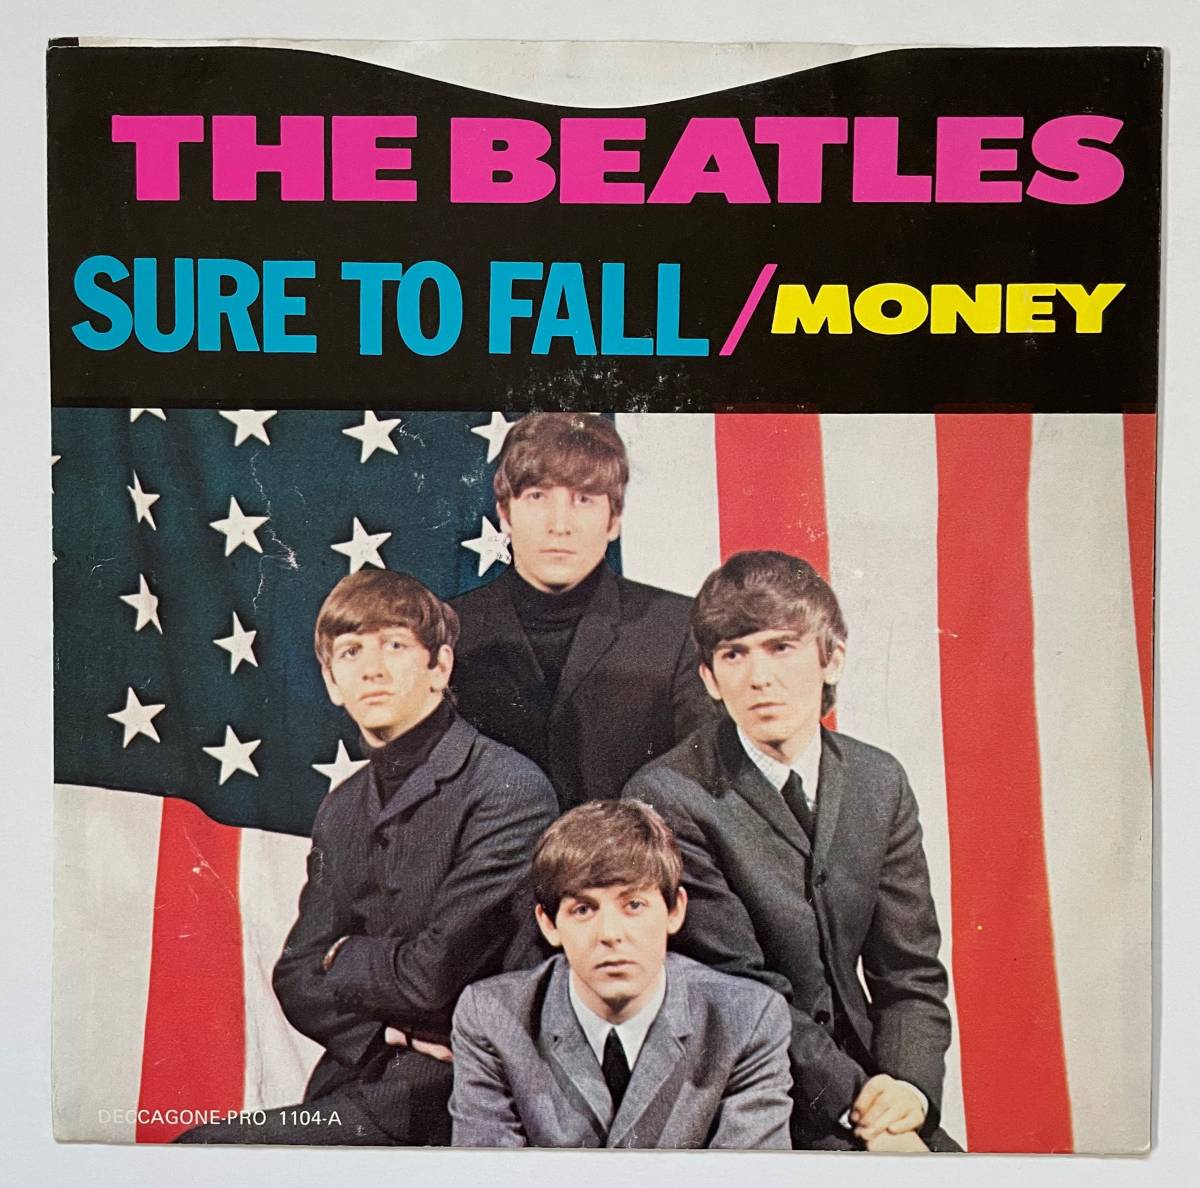 Unofficial Clear EP「Sure To Fall / Money」THE BEATLES ジョンレノン ポールマッカートニー ジョージハリソン リンゴスター_画像1